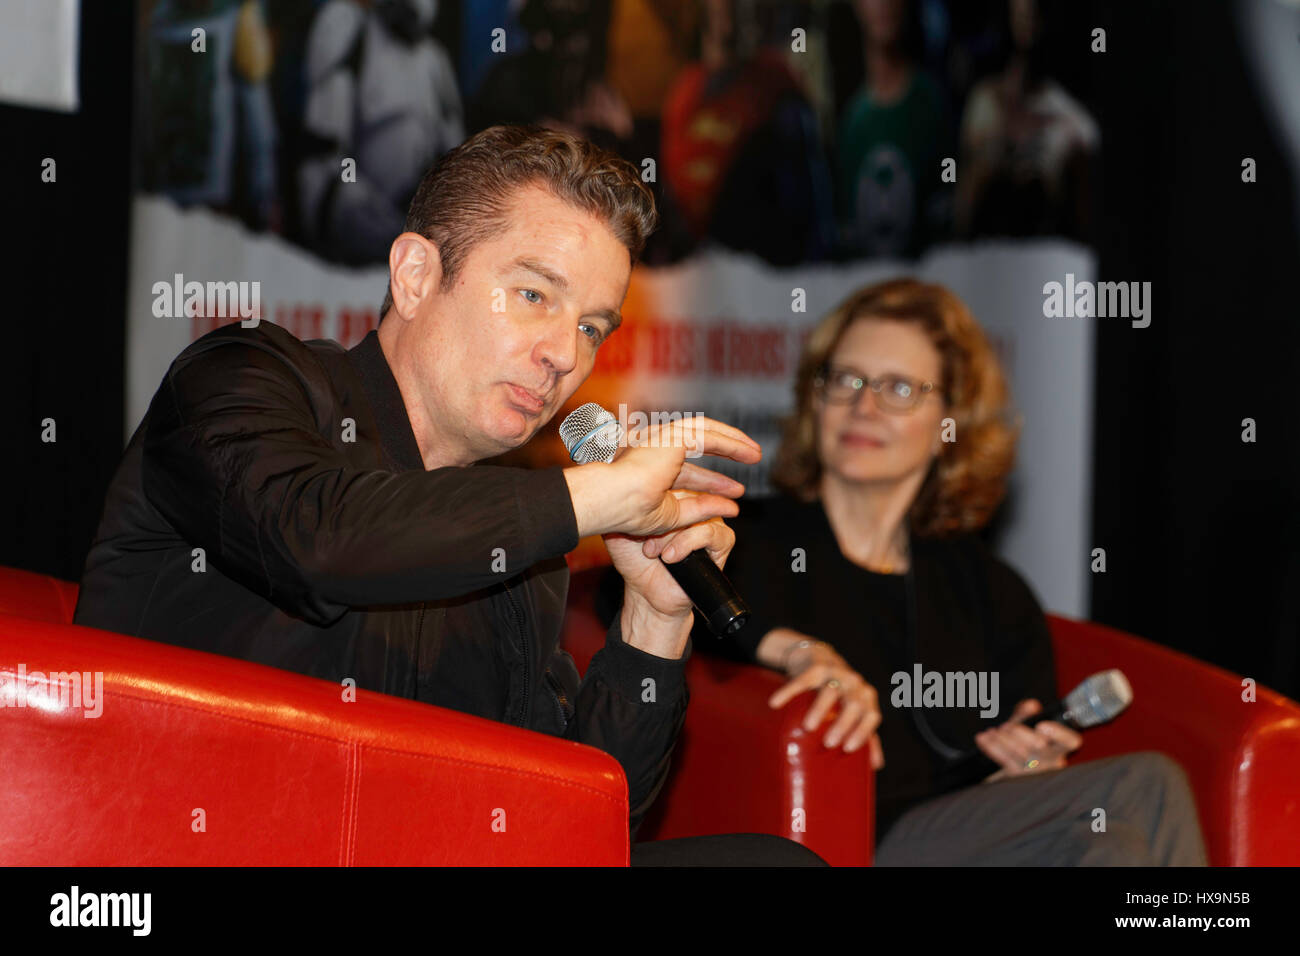 Paris, France, 25th March 2017. James Marsters, actor and Kristine Sutherland, actress (Buffy the Vampire Slayer) attend the 23rd édition Paris Manga Sci-Fi Show. Credit: Bernard Menigault/Alamy Live News Stock Photo